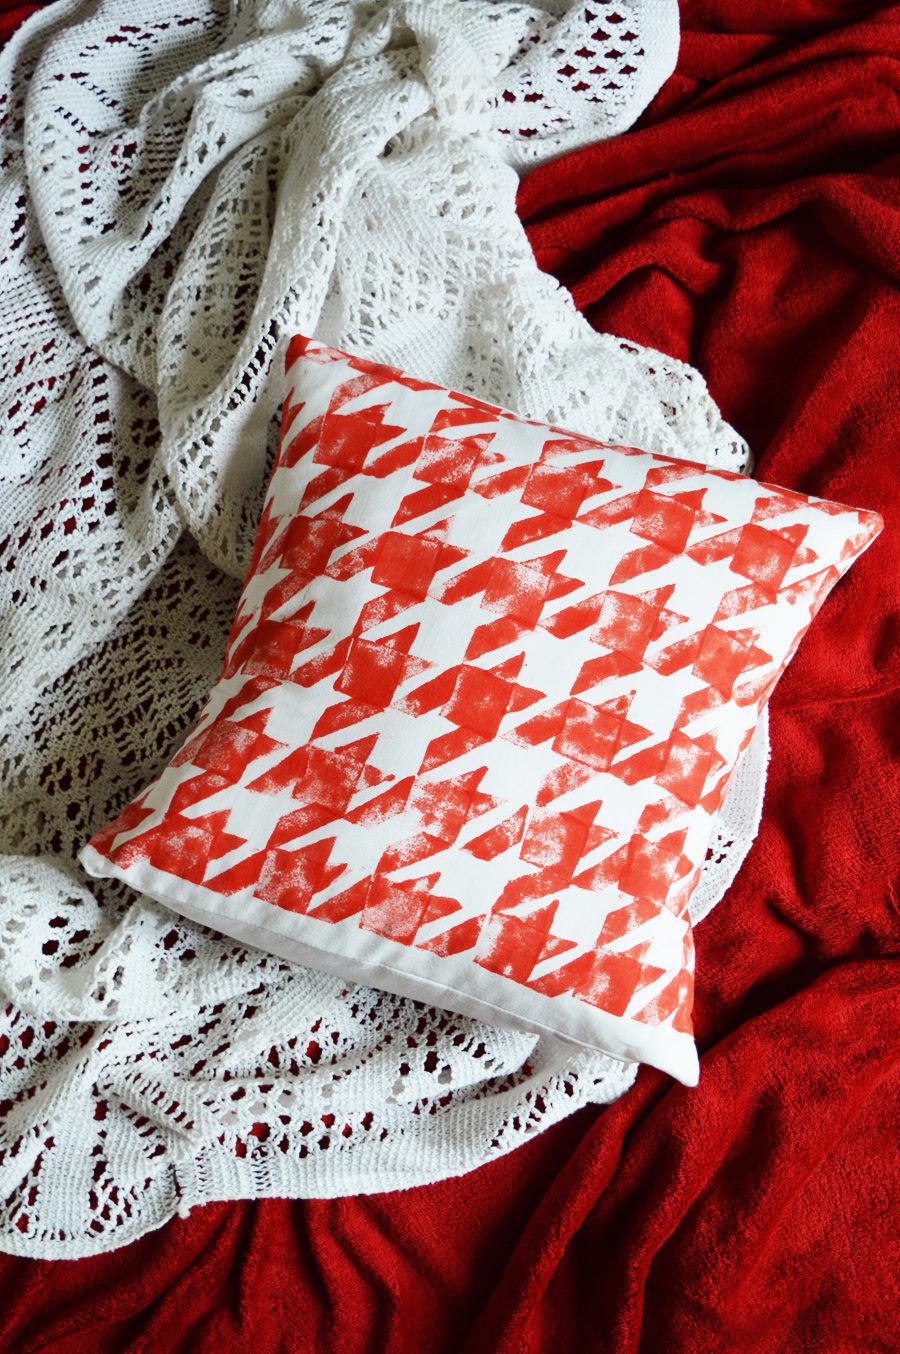 DIY houndstooth tutorial #stamping #fabric #sewing craftingfingers.co.uk